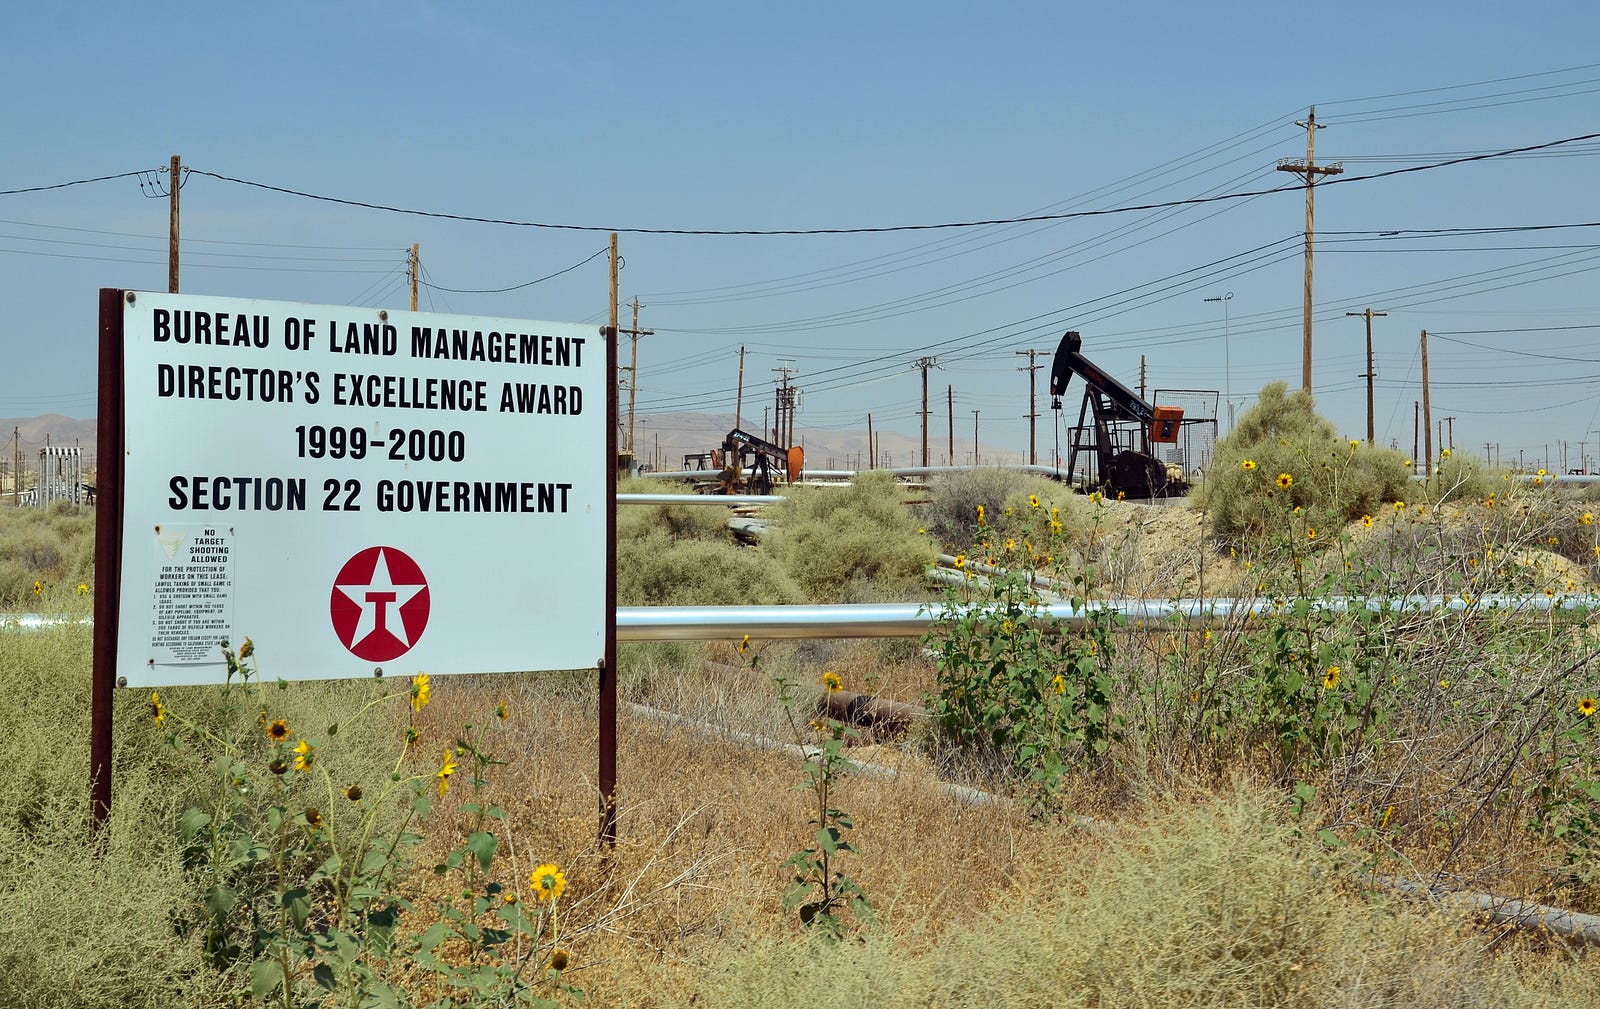 Sign in front of a pumpjack:
BUREAU OF LAND MANAGEMENT
DIRECTOR'S EXCELLENCE AWARD
1999-2000
SECTION 22 GOVERNMENT
Below is the Texaco logo.